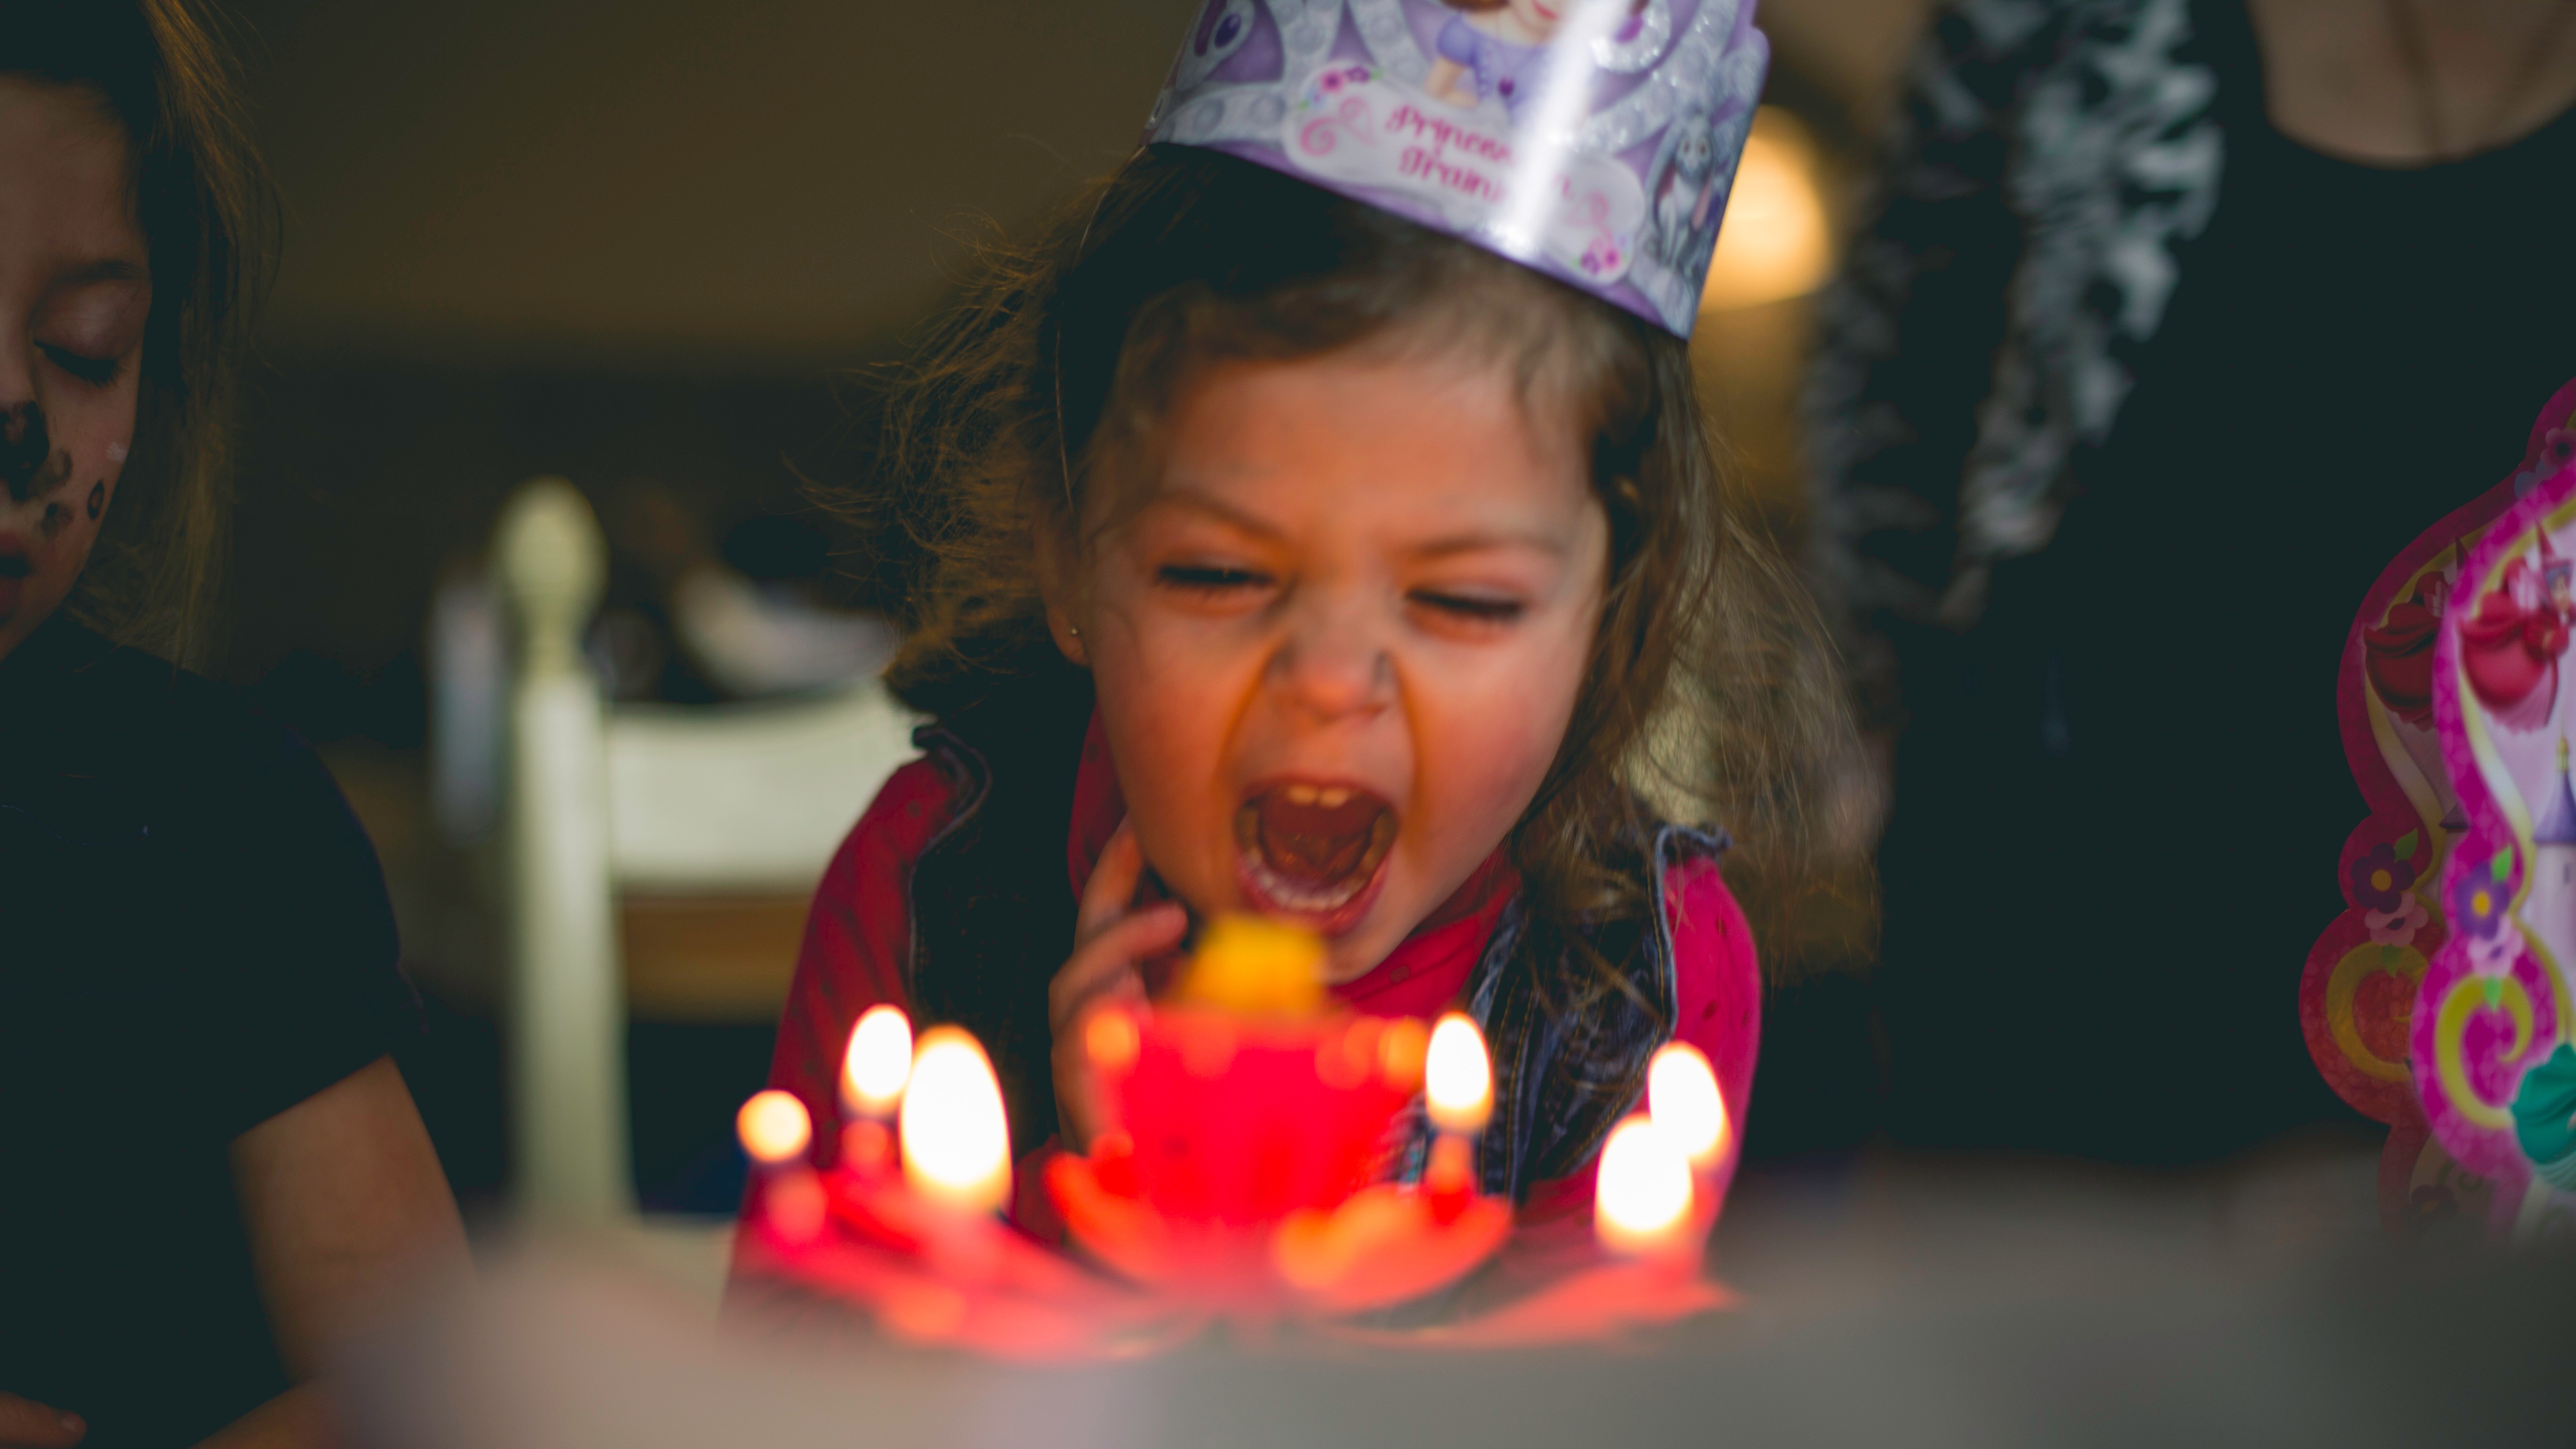 A young girl with a birthday hat is yelling in front of a cake with several lit candles. 